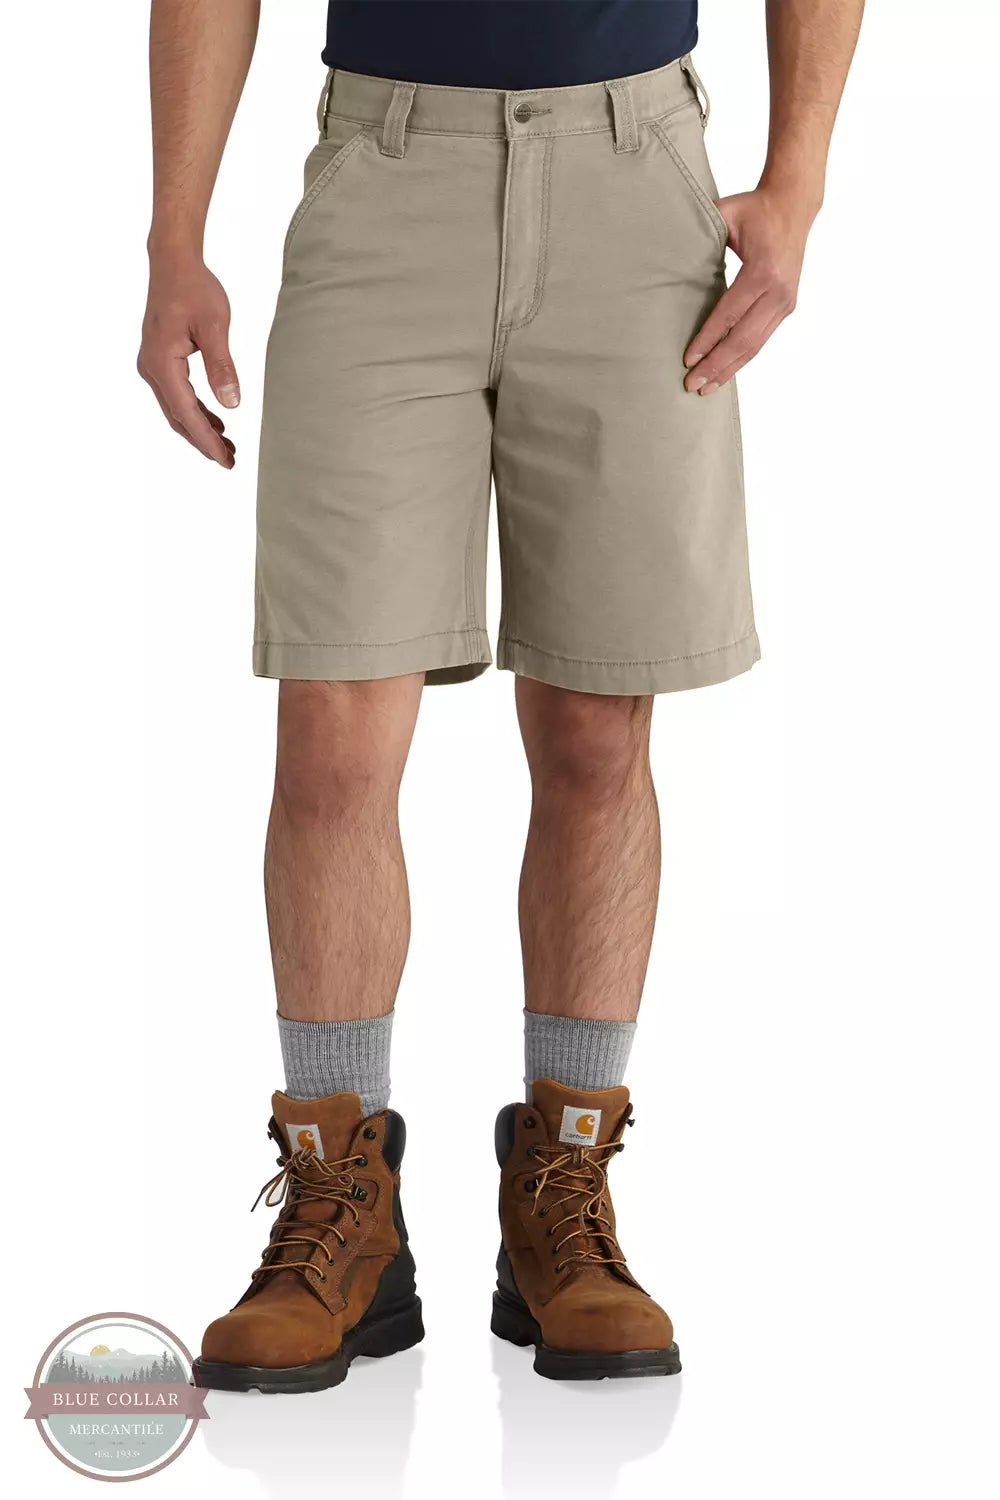 Carhartt 102514 Rugged Flex® Rigby Shorts in Tan Front View